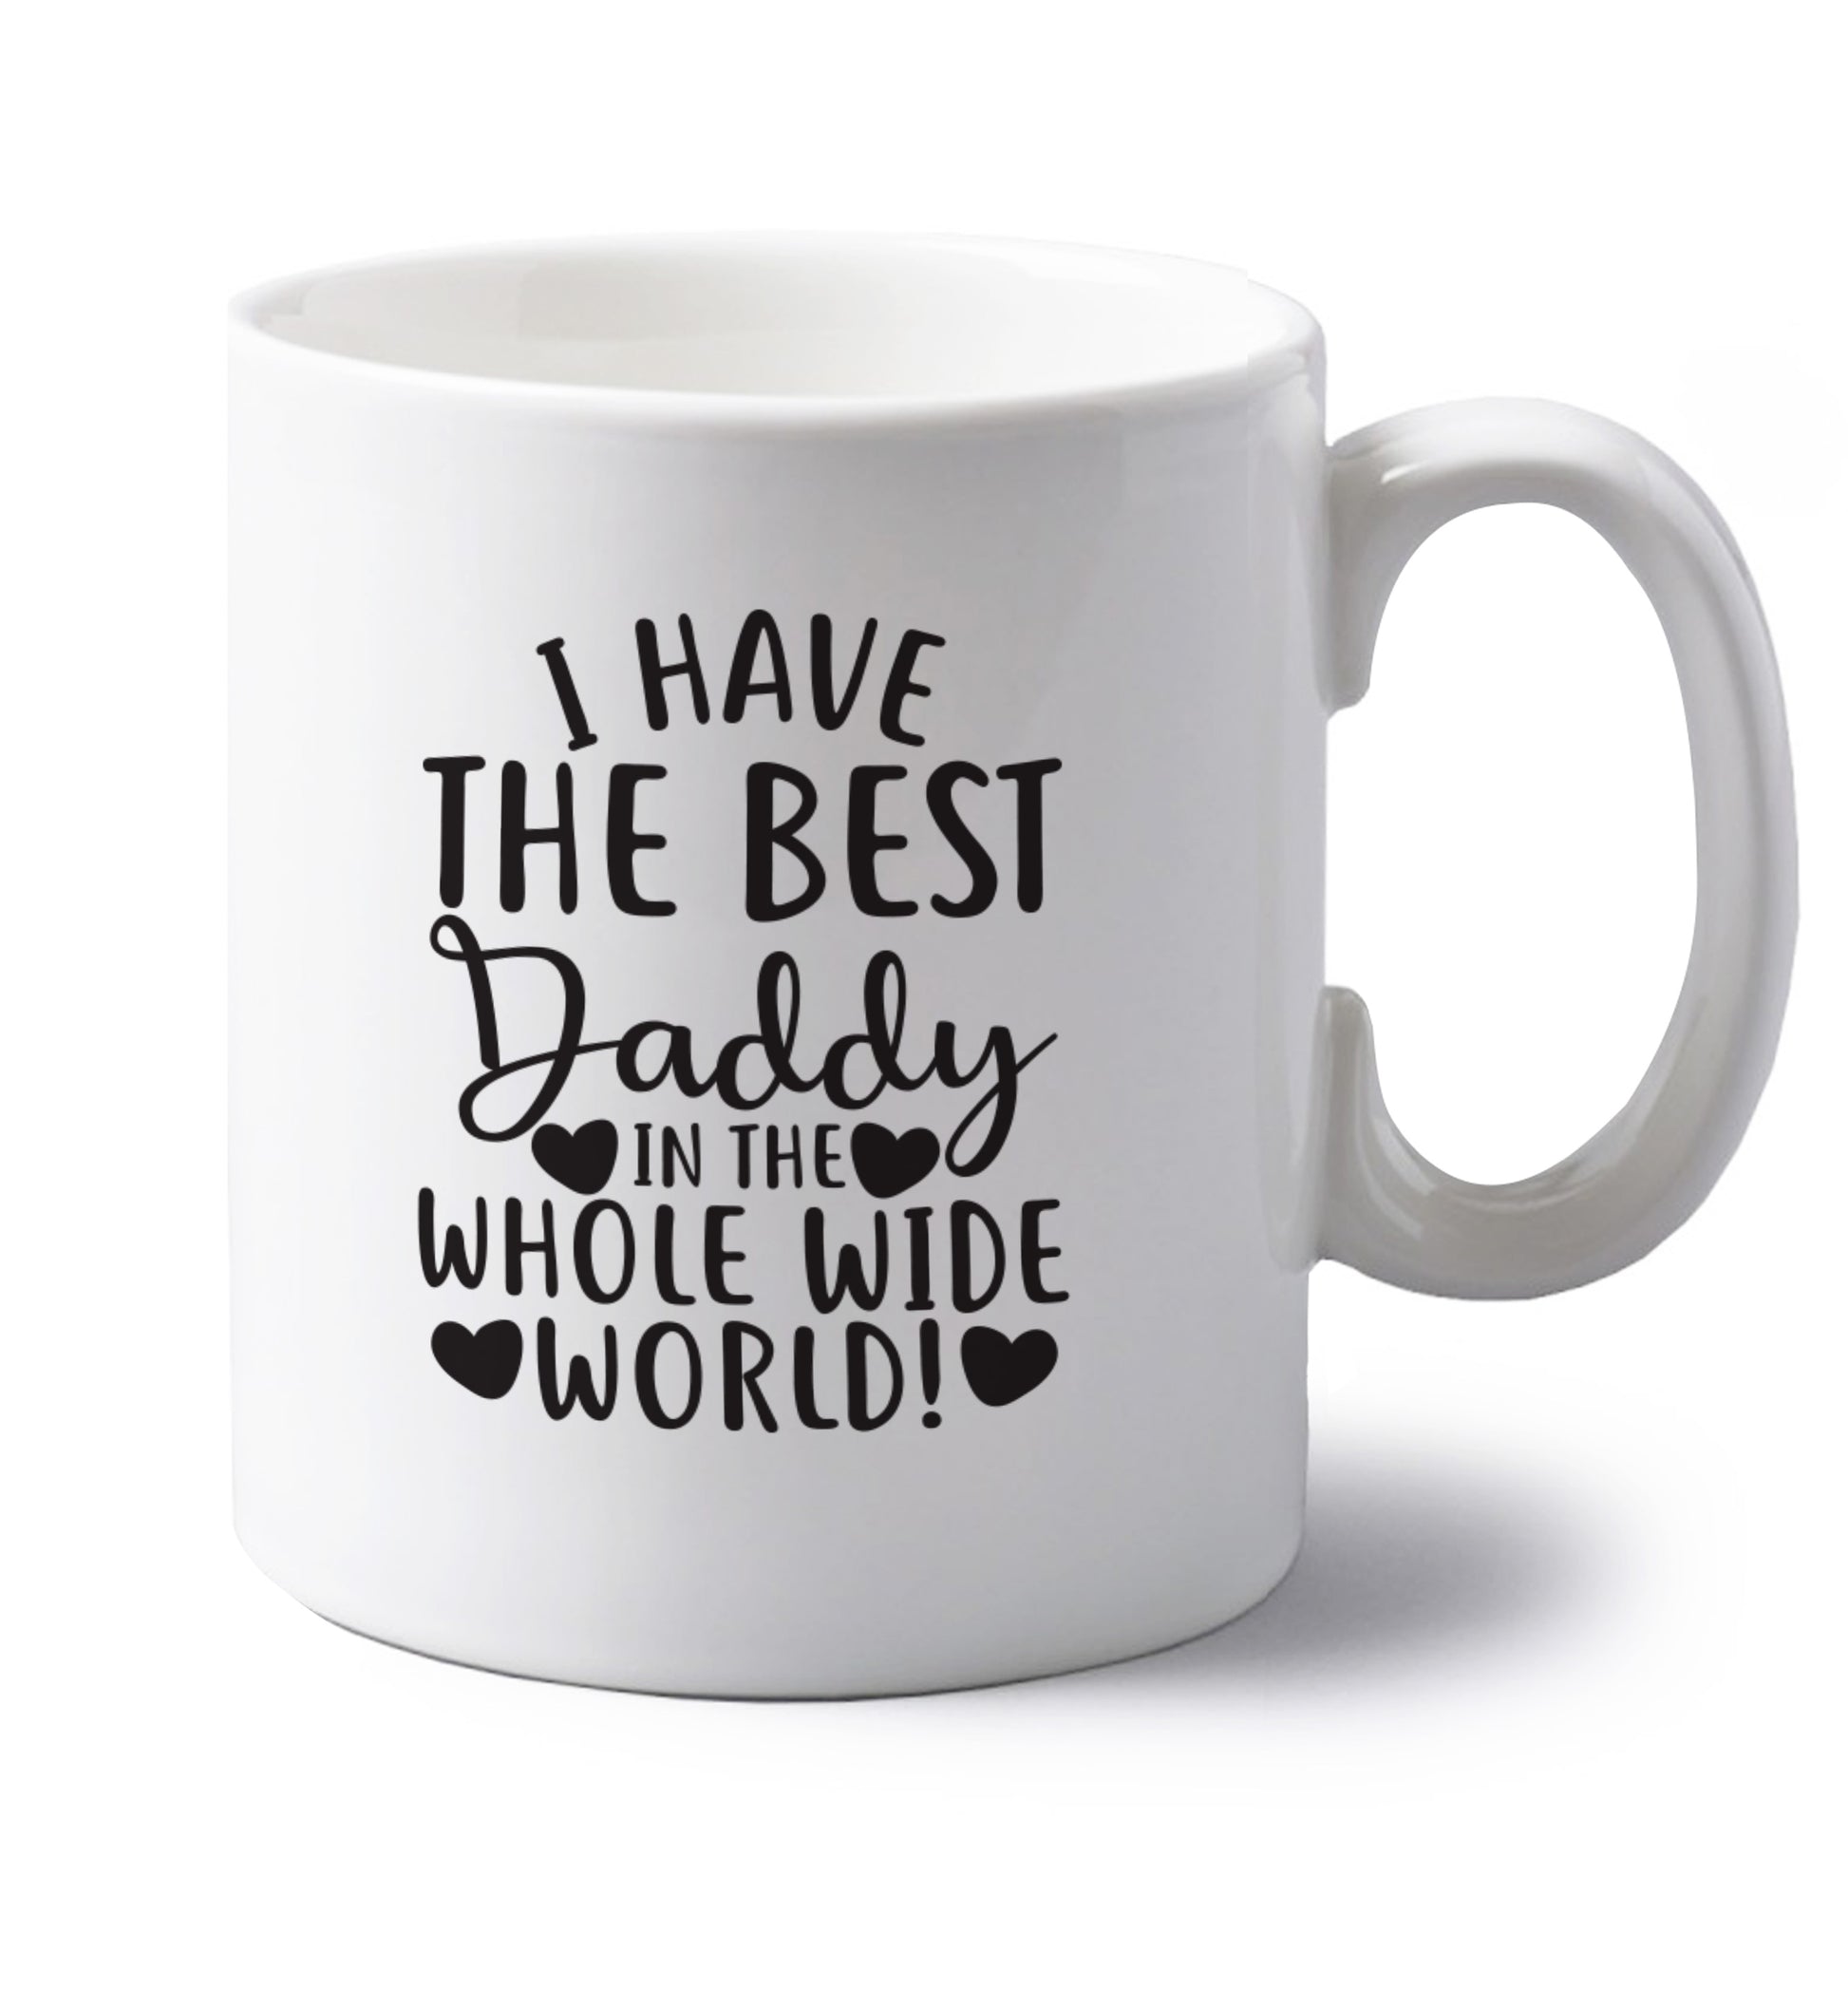 I have the best daddy in the whole wide world left handed white ceramic mug 